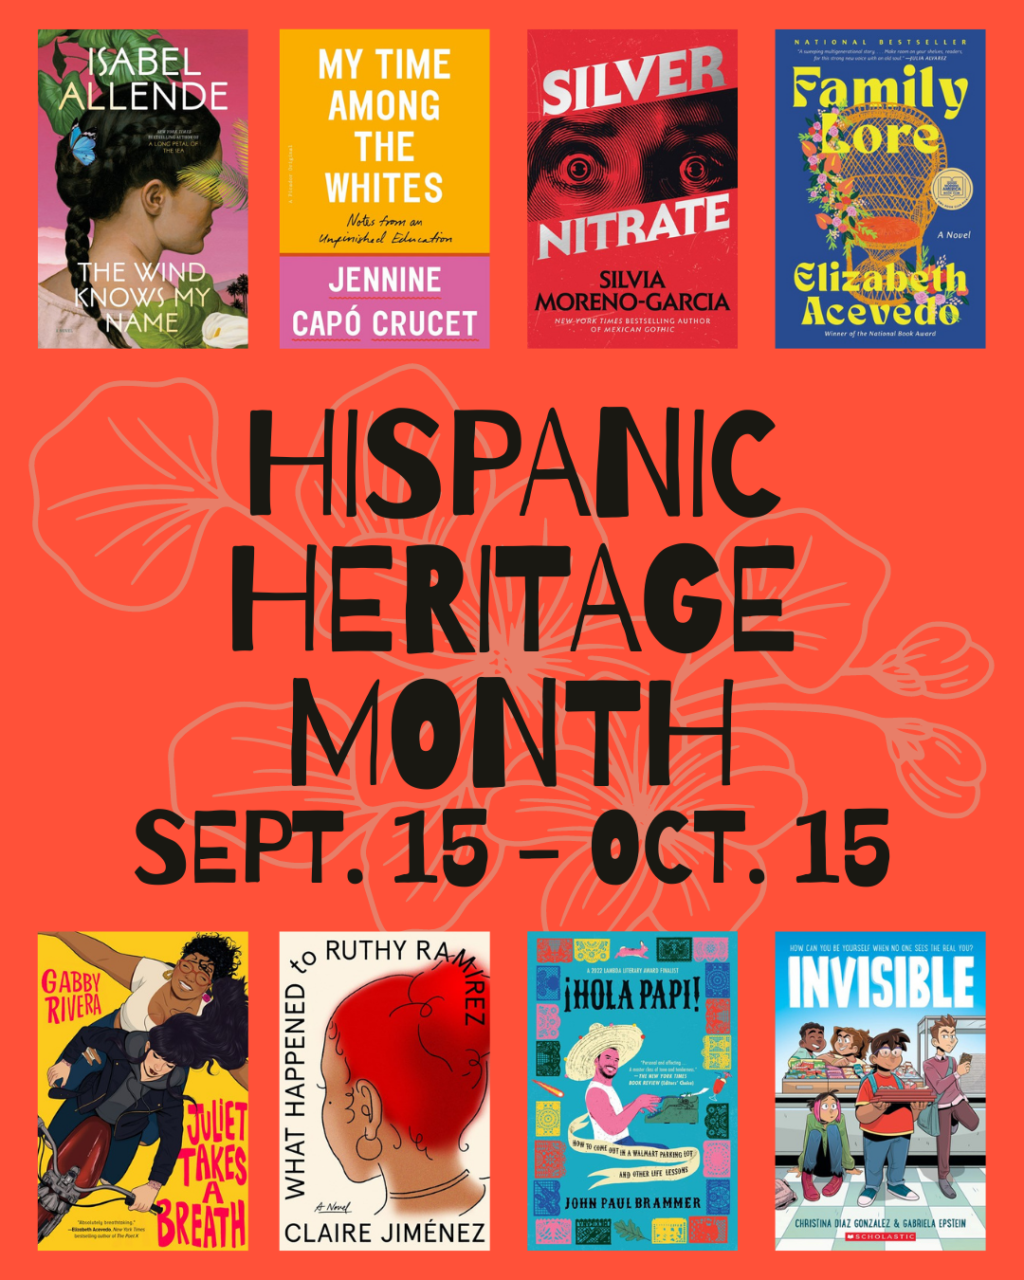 Graphic reads, "Hispanic Heritage Month, Sept. 15 - Oct. 15 with the covers of 8 books:
The Wind Knows My Name by Isabel Allende 
My Time Among the Whites by Jennine Capó Crucet  
Silver Nitrate by Silvia Moreno-Garcia
Family Lore by Elizabeth Acevedo 
Juliet Takes a Breath by Gabby Rivera
What Happened to Ruthy Ramirez by Claire Jimenez 
Hola Papi: How to Come Out in a Walmart Parking Lot and Other Life Lessons by John Paul Brammer 
Invisible by Christina Diaz Gonzalez & Gabriela Epstein (Illustrator) 
